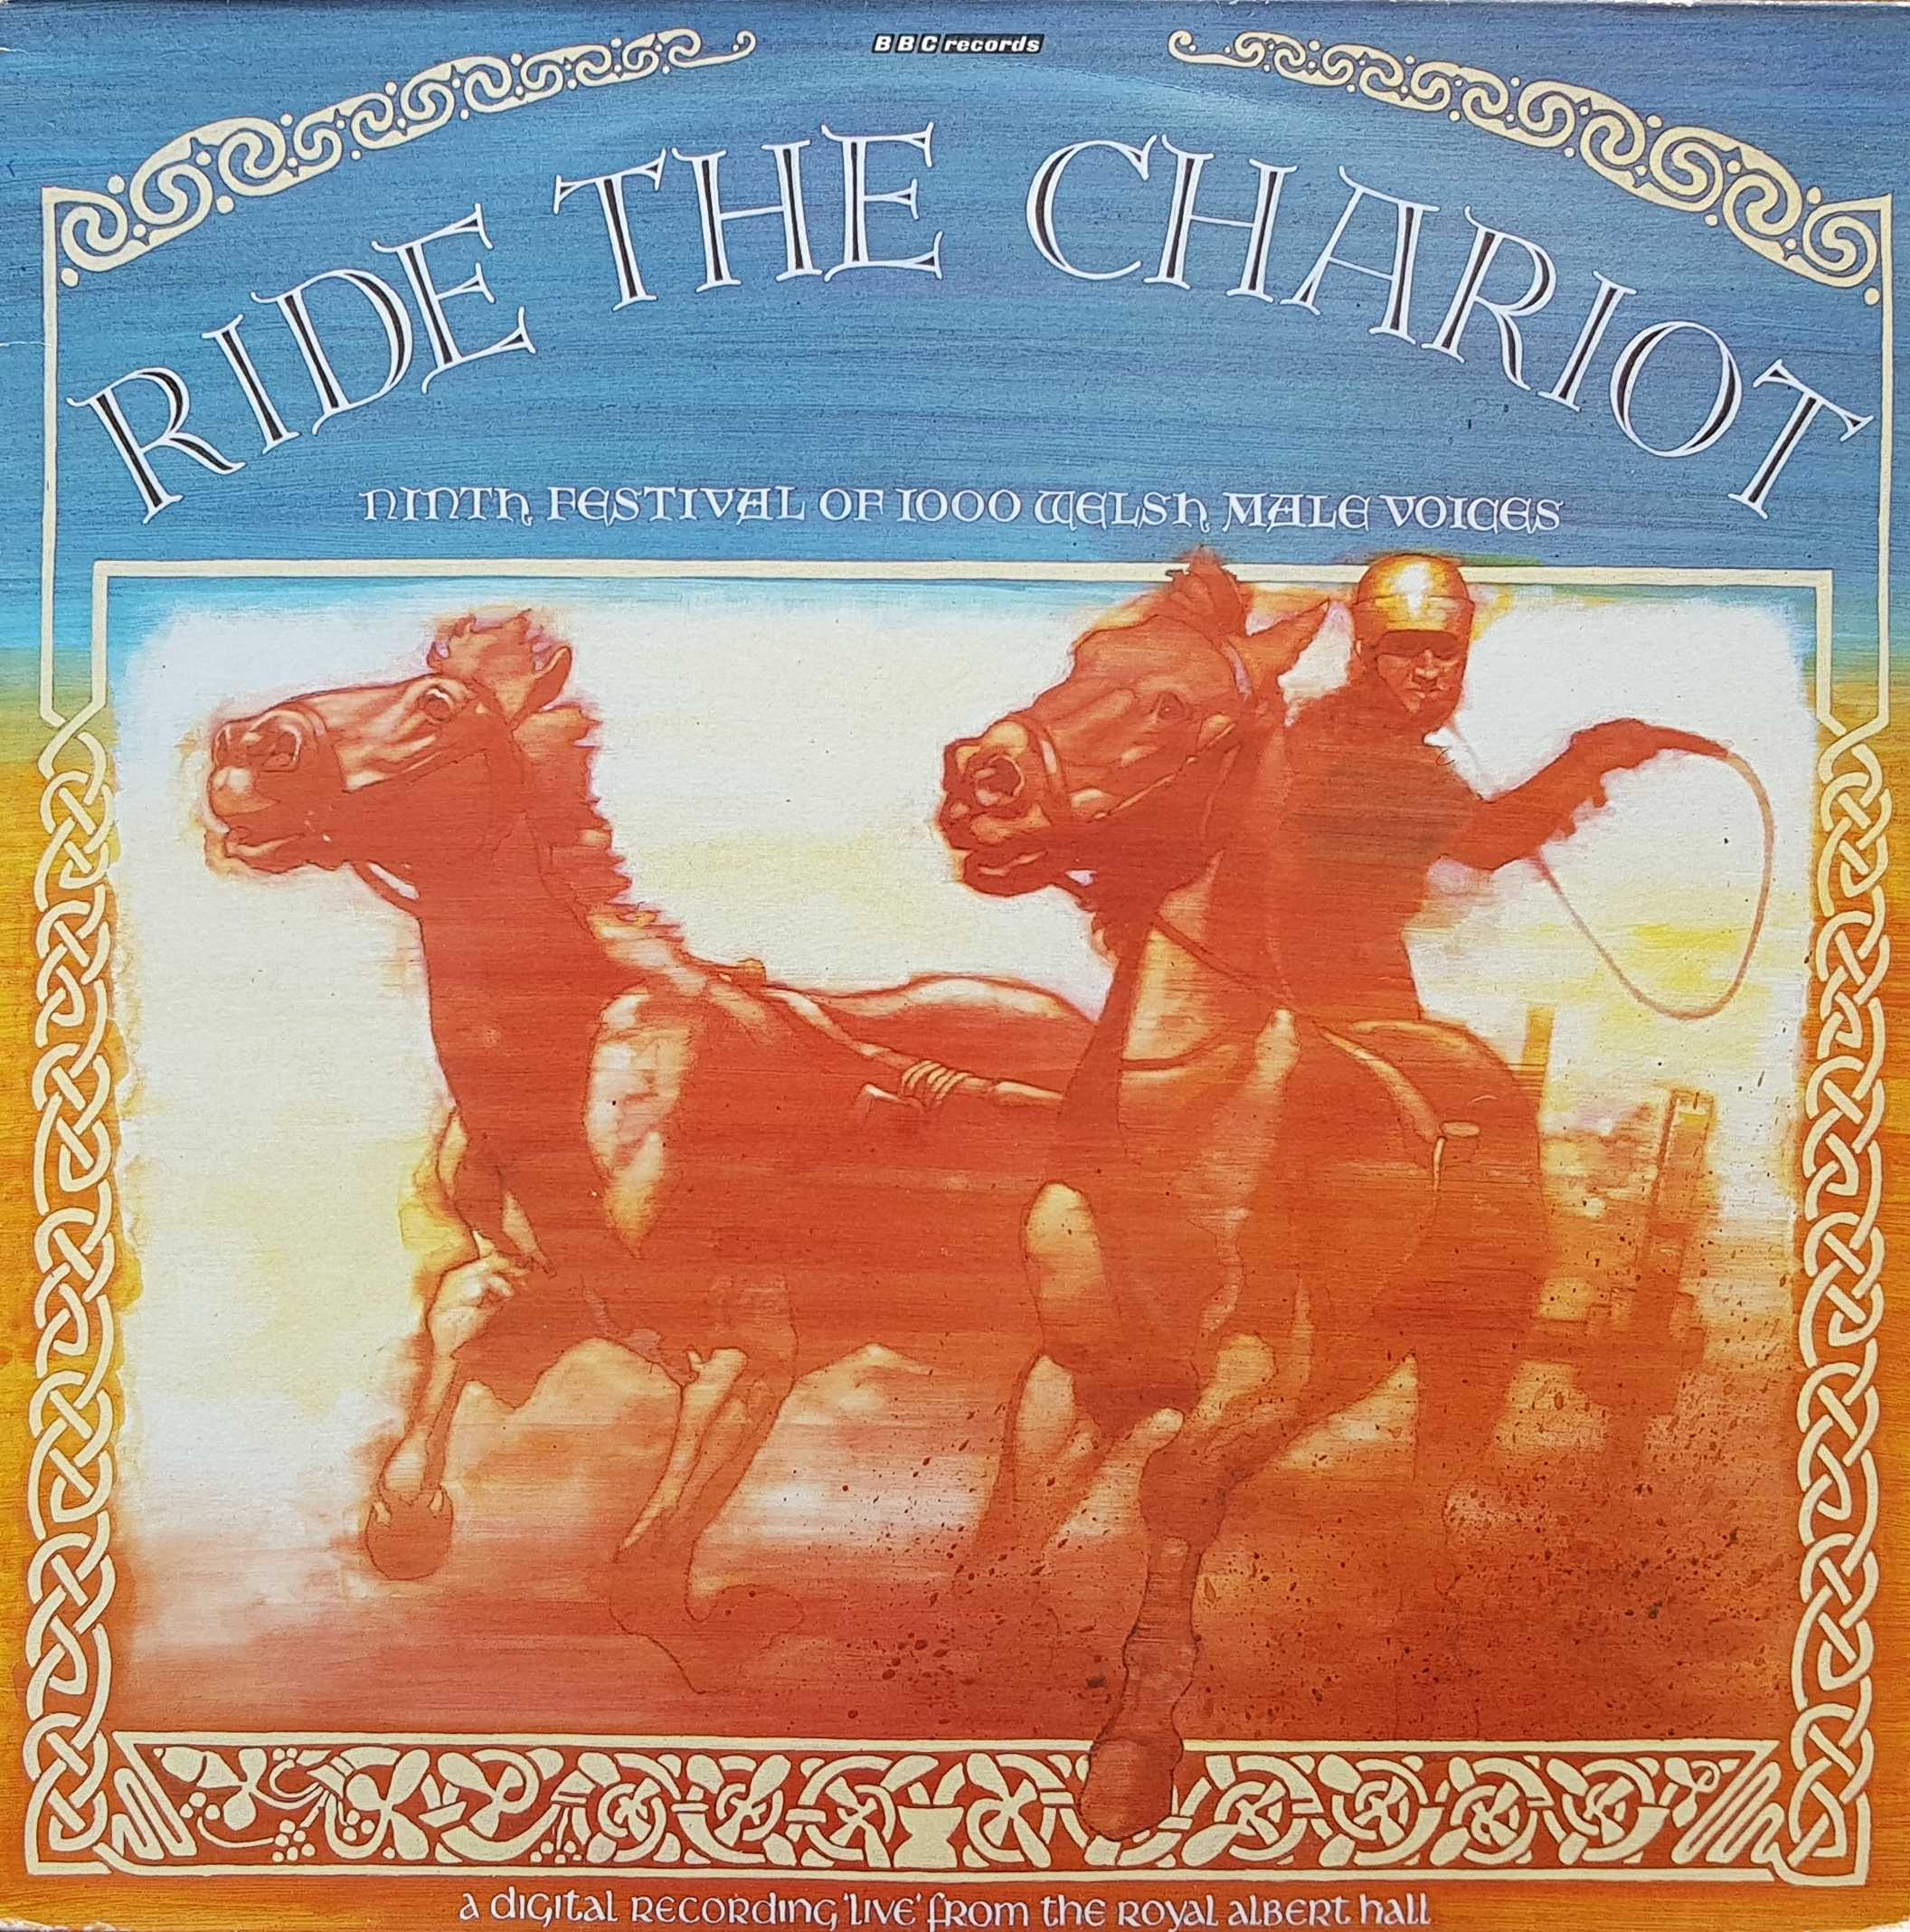 Picture of REH 551 Ride the chariot by artist Various from the BBC albums - Records and Tapes library